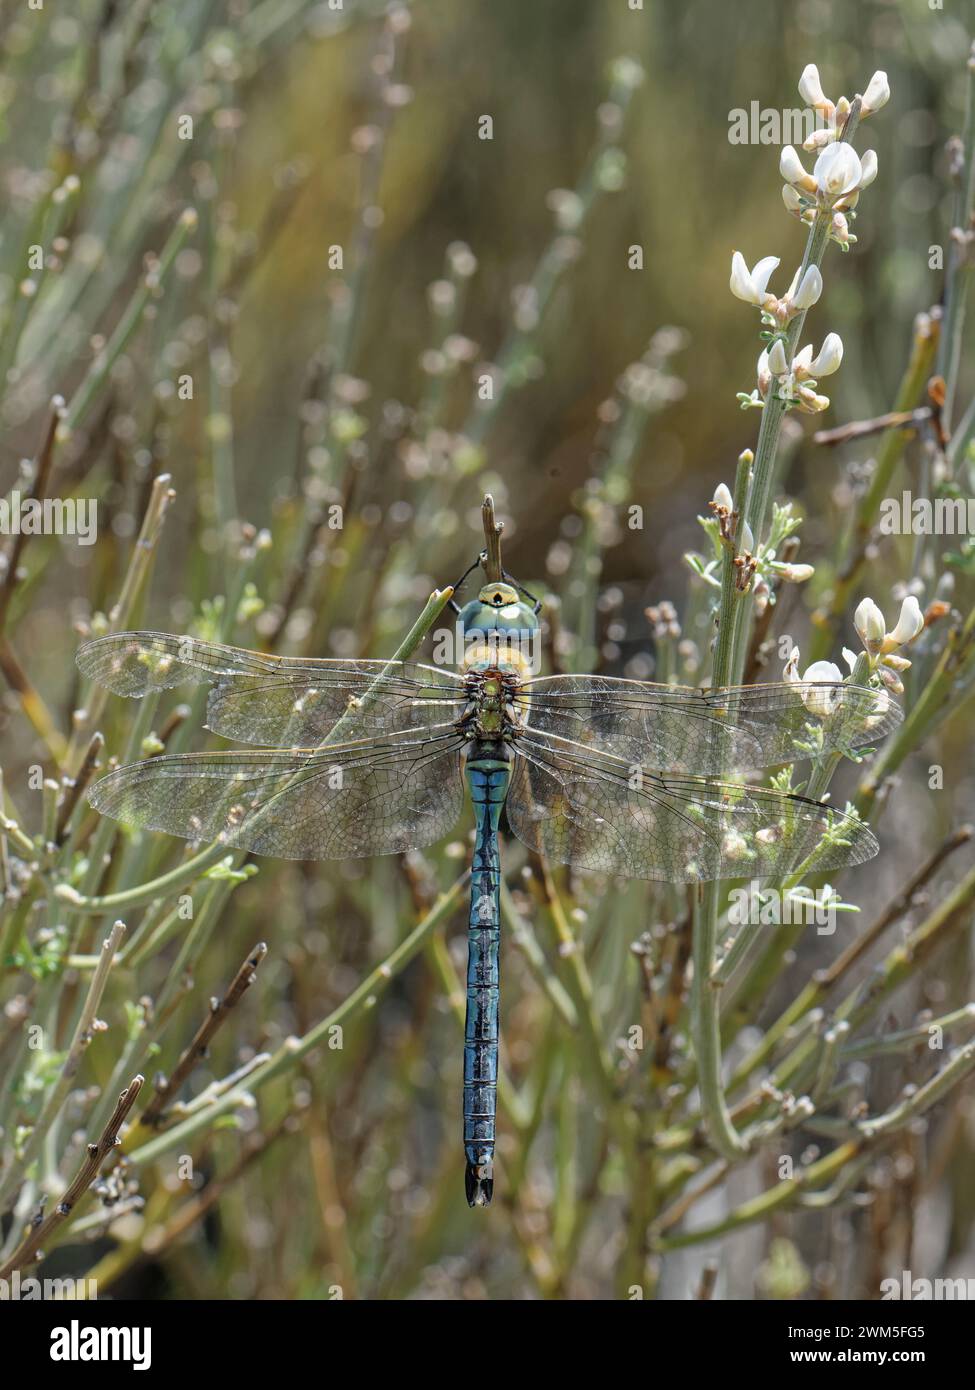 Emperor dragonfly (Anax imperator) male, resting on Teide white broom (Spartocystisus supranubius) bush at 2000m altitude in Teide National Park, Tene Stock Photo